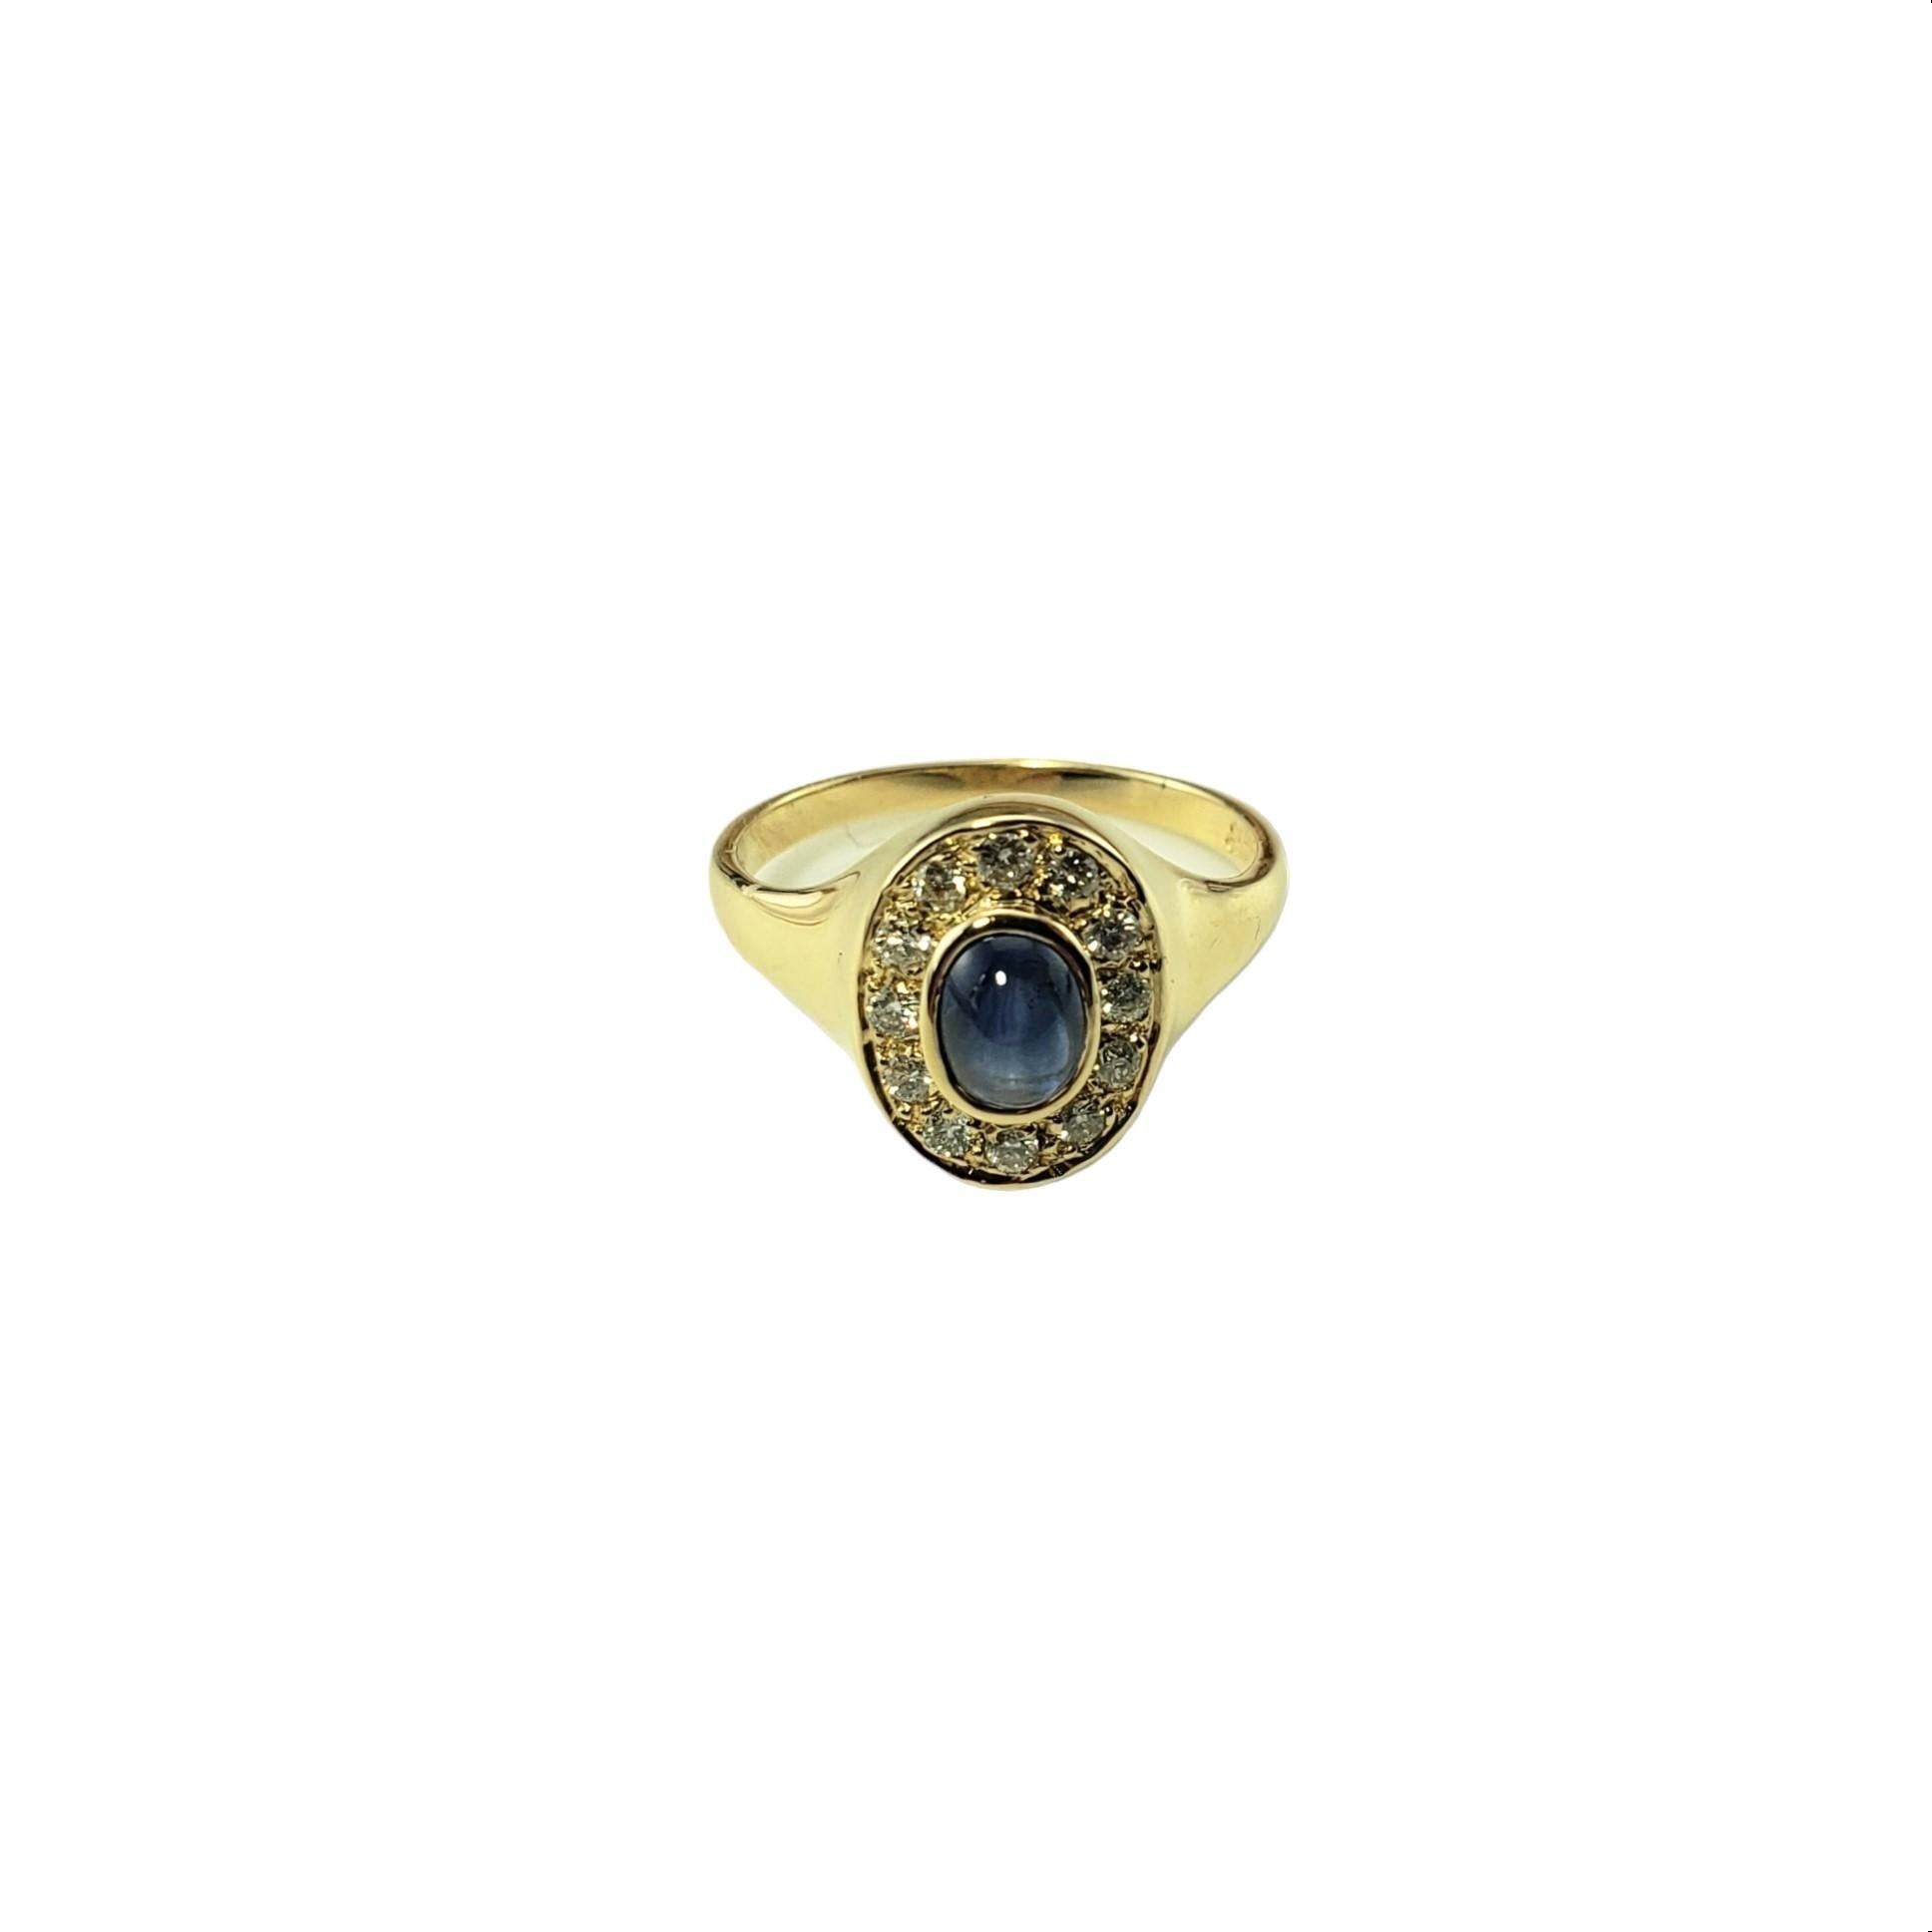 Vintage 14 Karat Yellow Gold Sapphire and Diamond Ring Size 6.25 JAGi Certified-

This elegant ring features one oval blue cabochon sapphire and 12 round brilliant cut diamonds set in classic 14K yellow gold.  Width: 12 mm.  Shank: 1.7 mm.

Sapphire